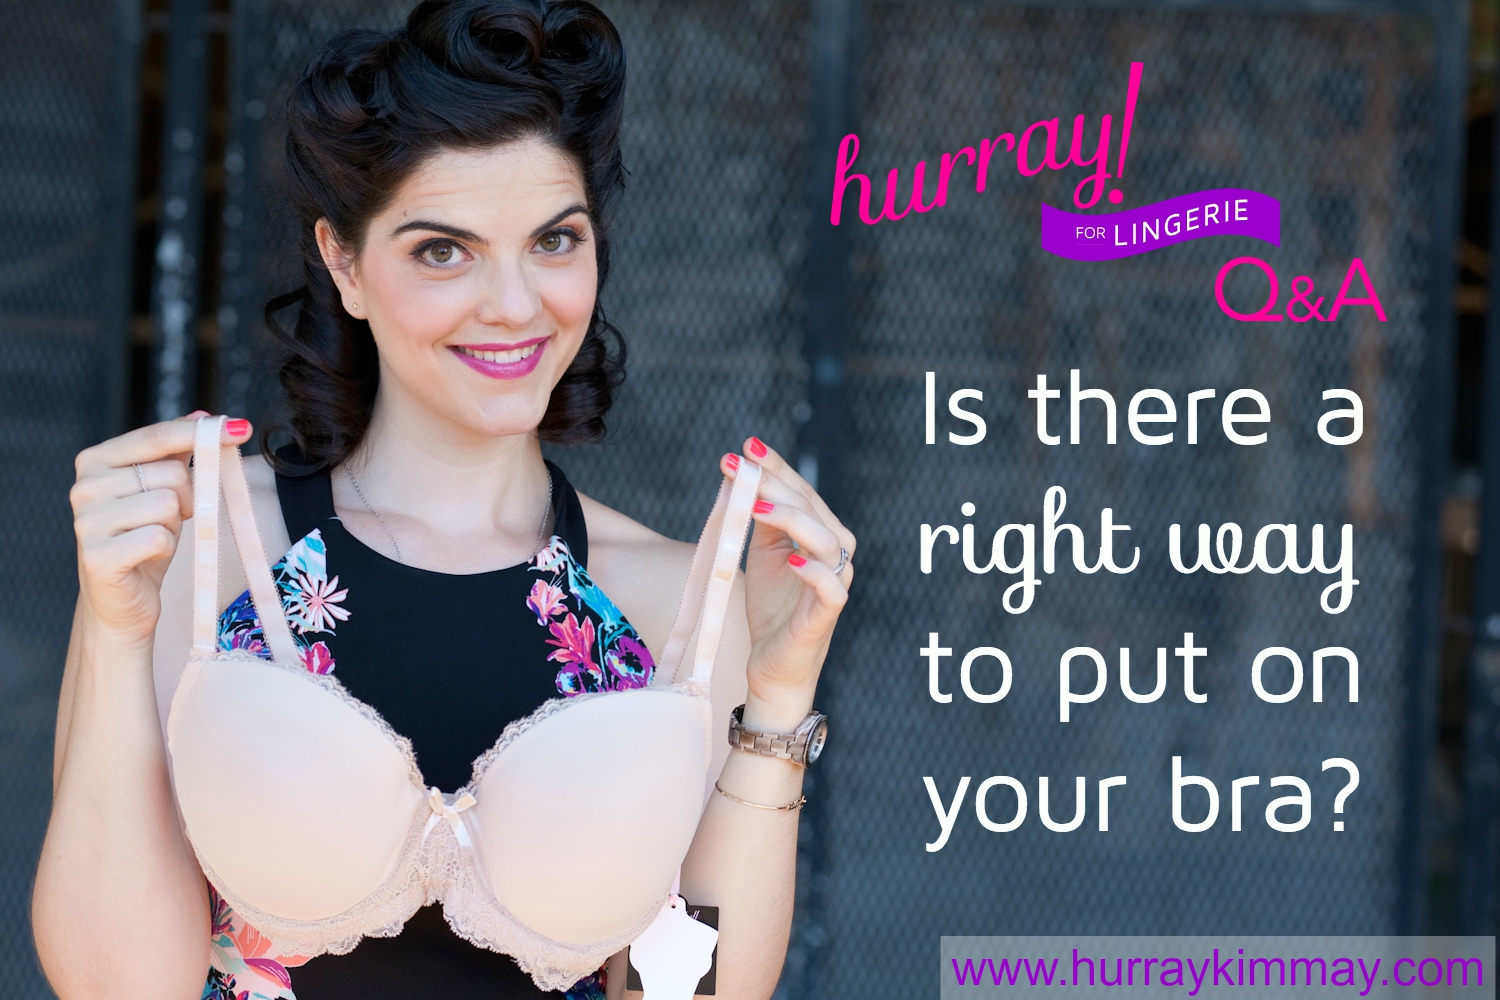 Hurray for Lingerie Q & A: Is there a right way to put on your bra?